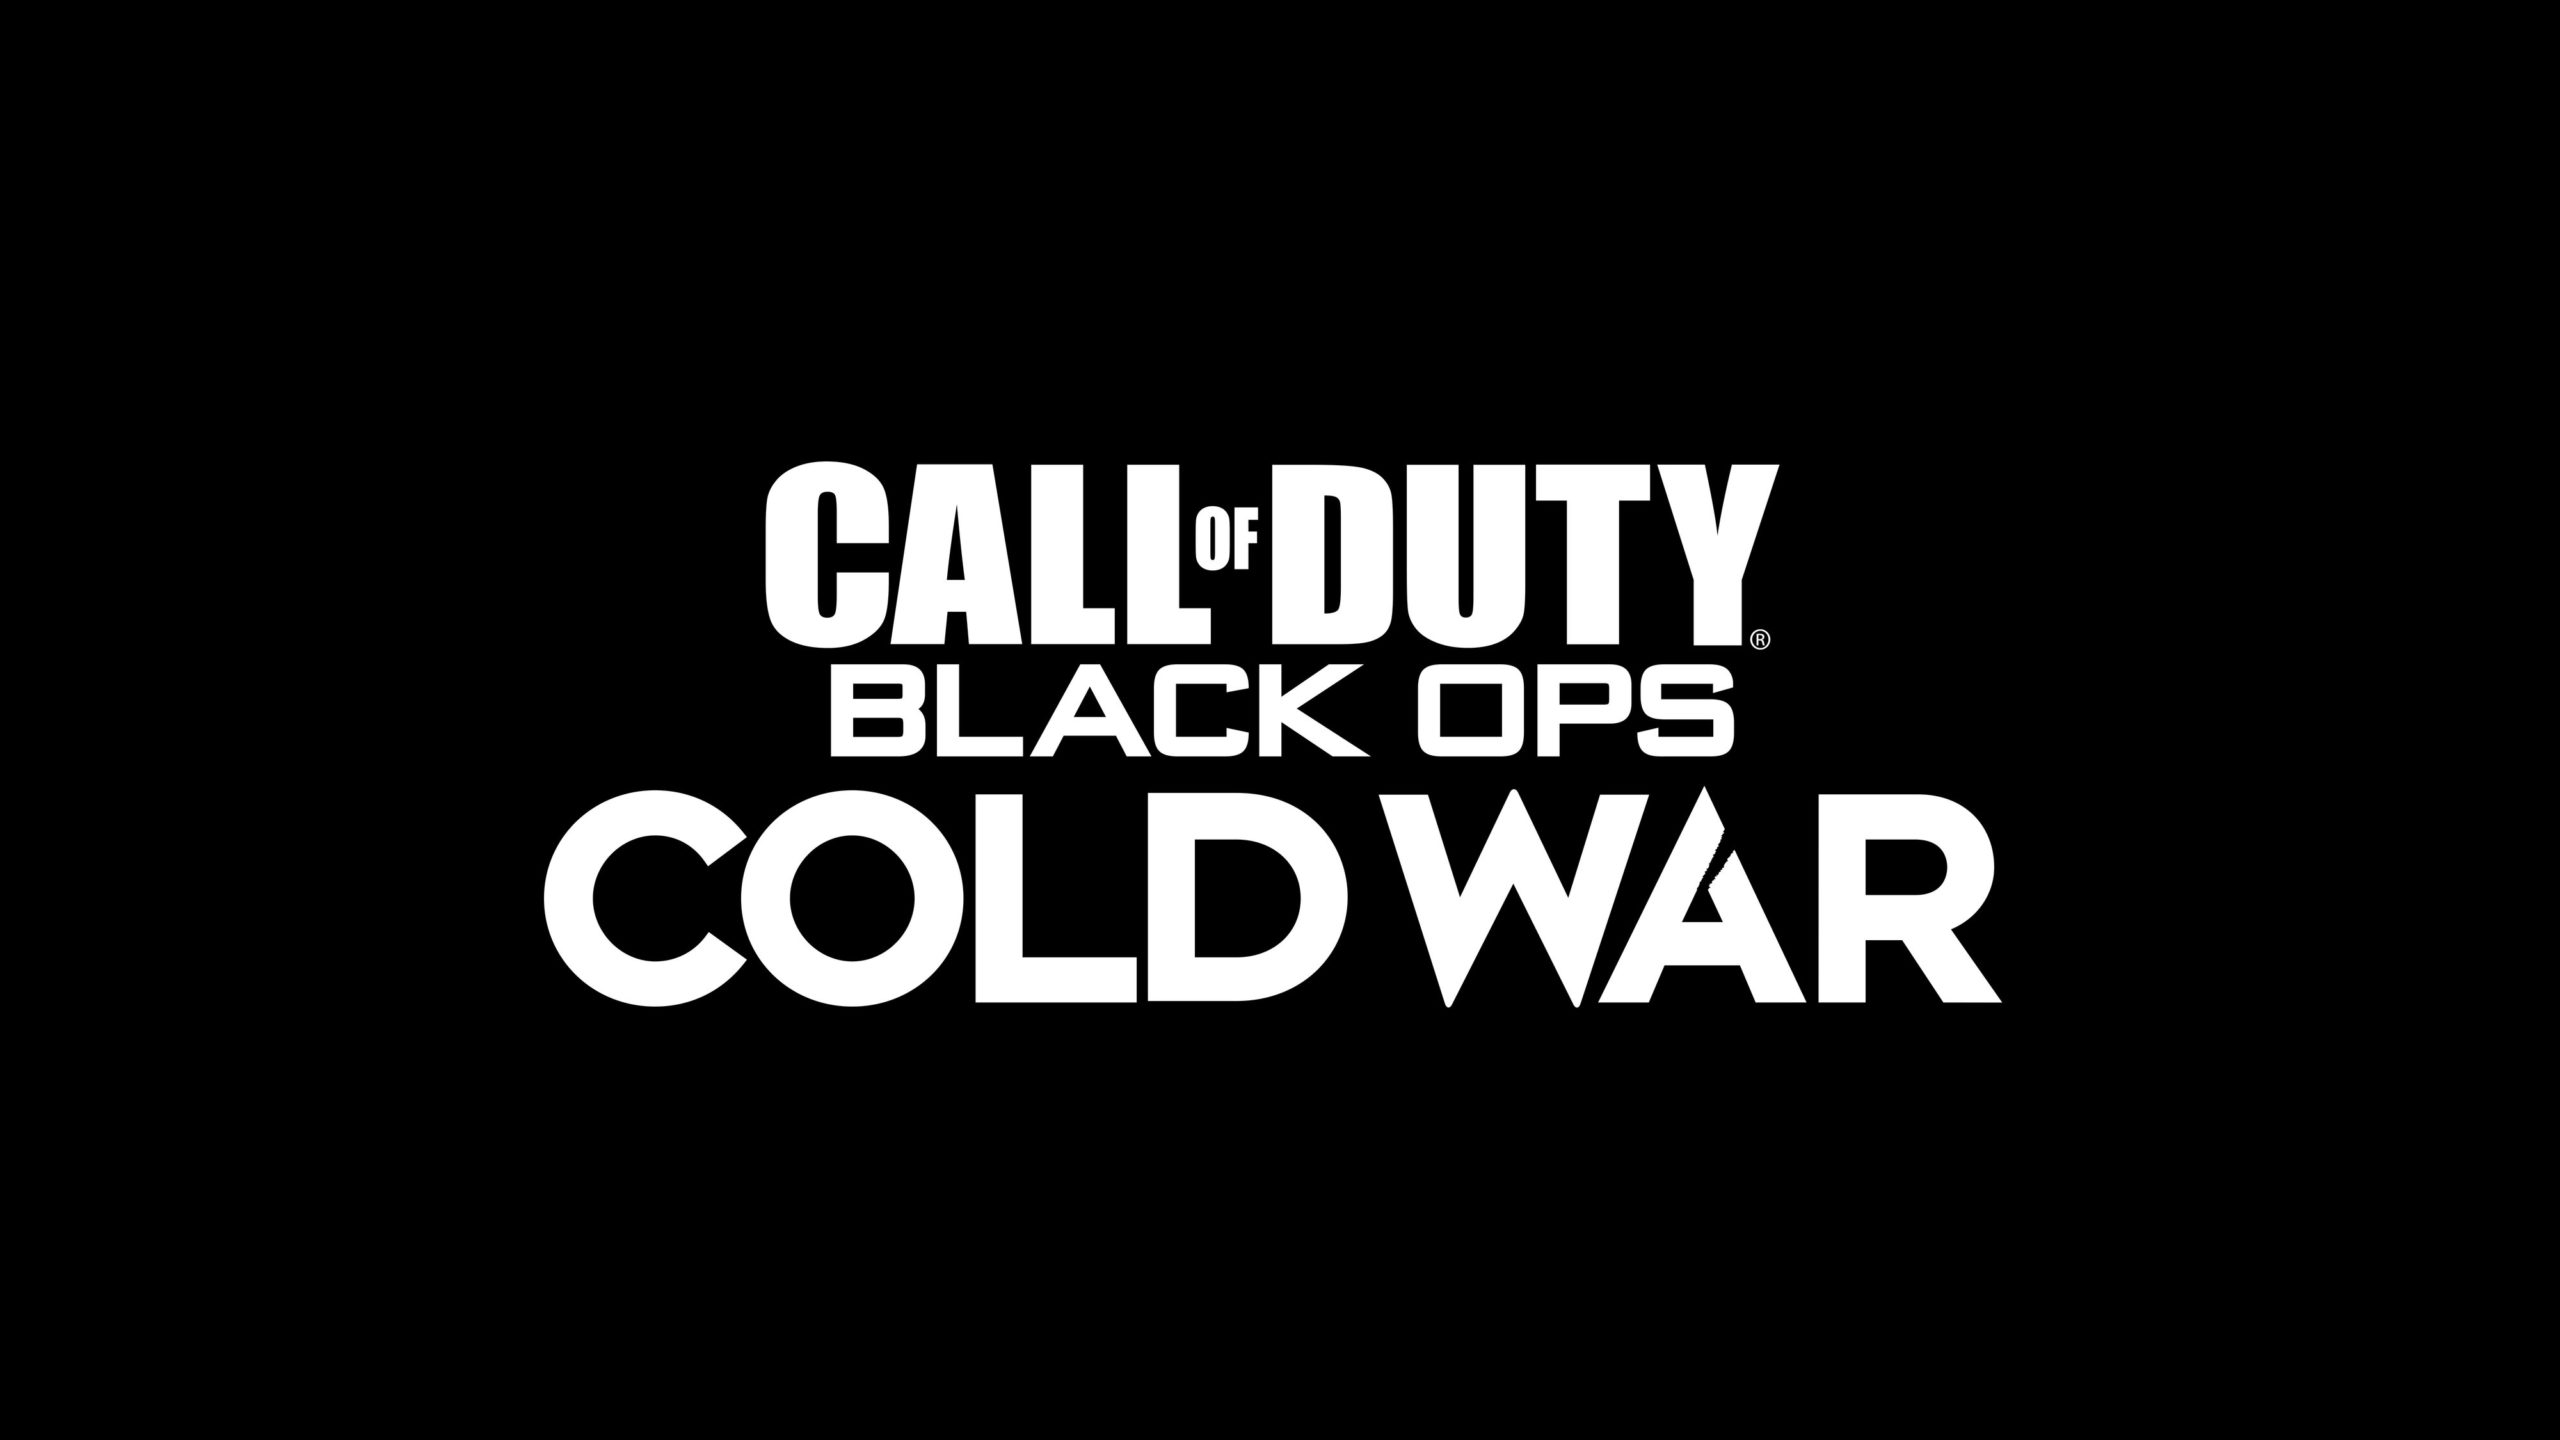 The Next Generation Of Black Ops Is Here! Call Of Duty Black Ops Cold